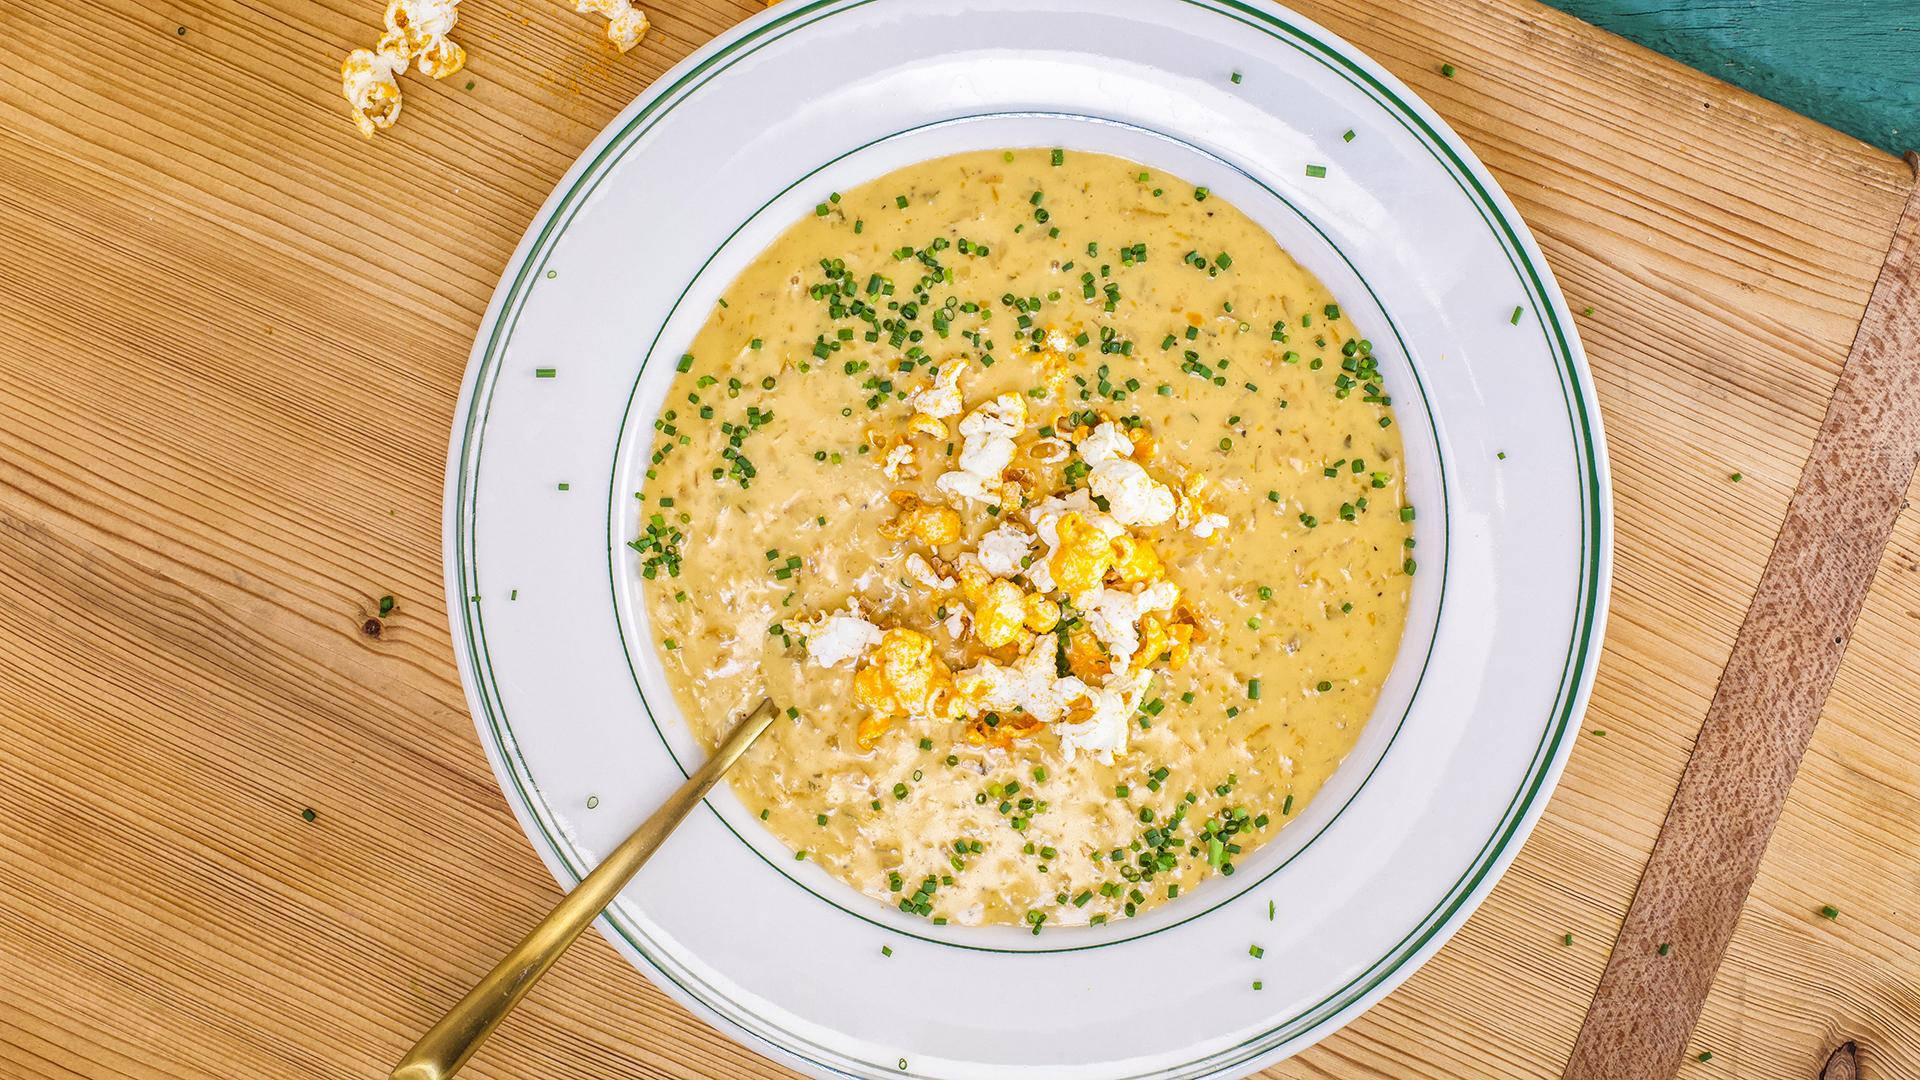 Rachael Ray's Beer Cheese Soup Wallpaper